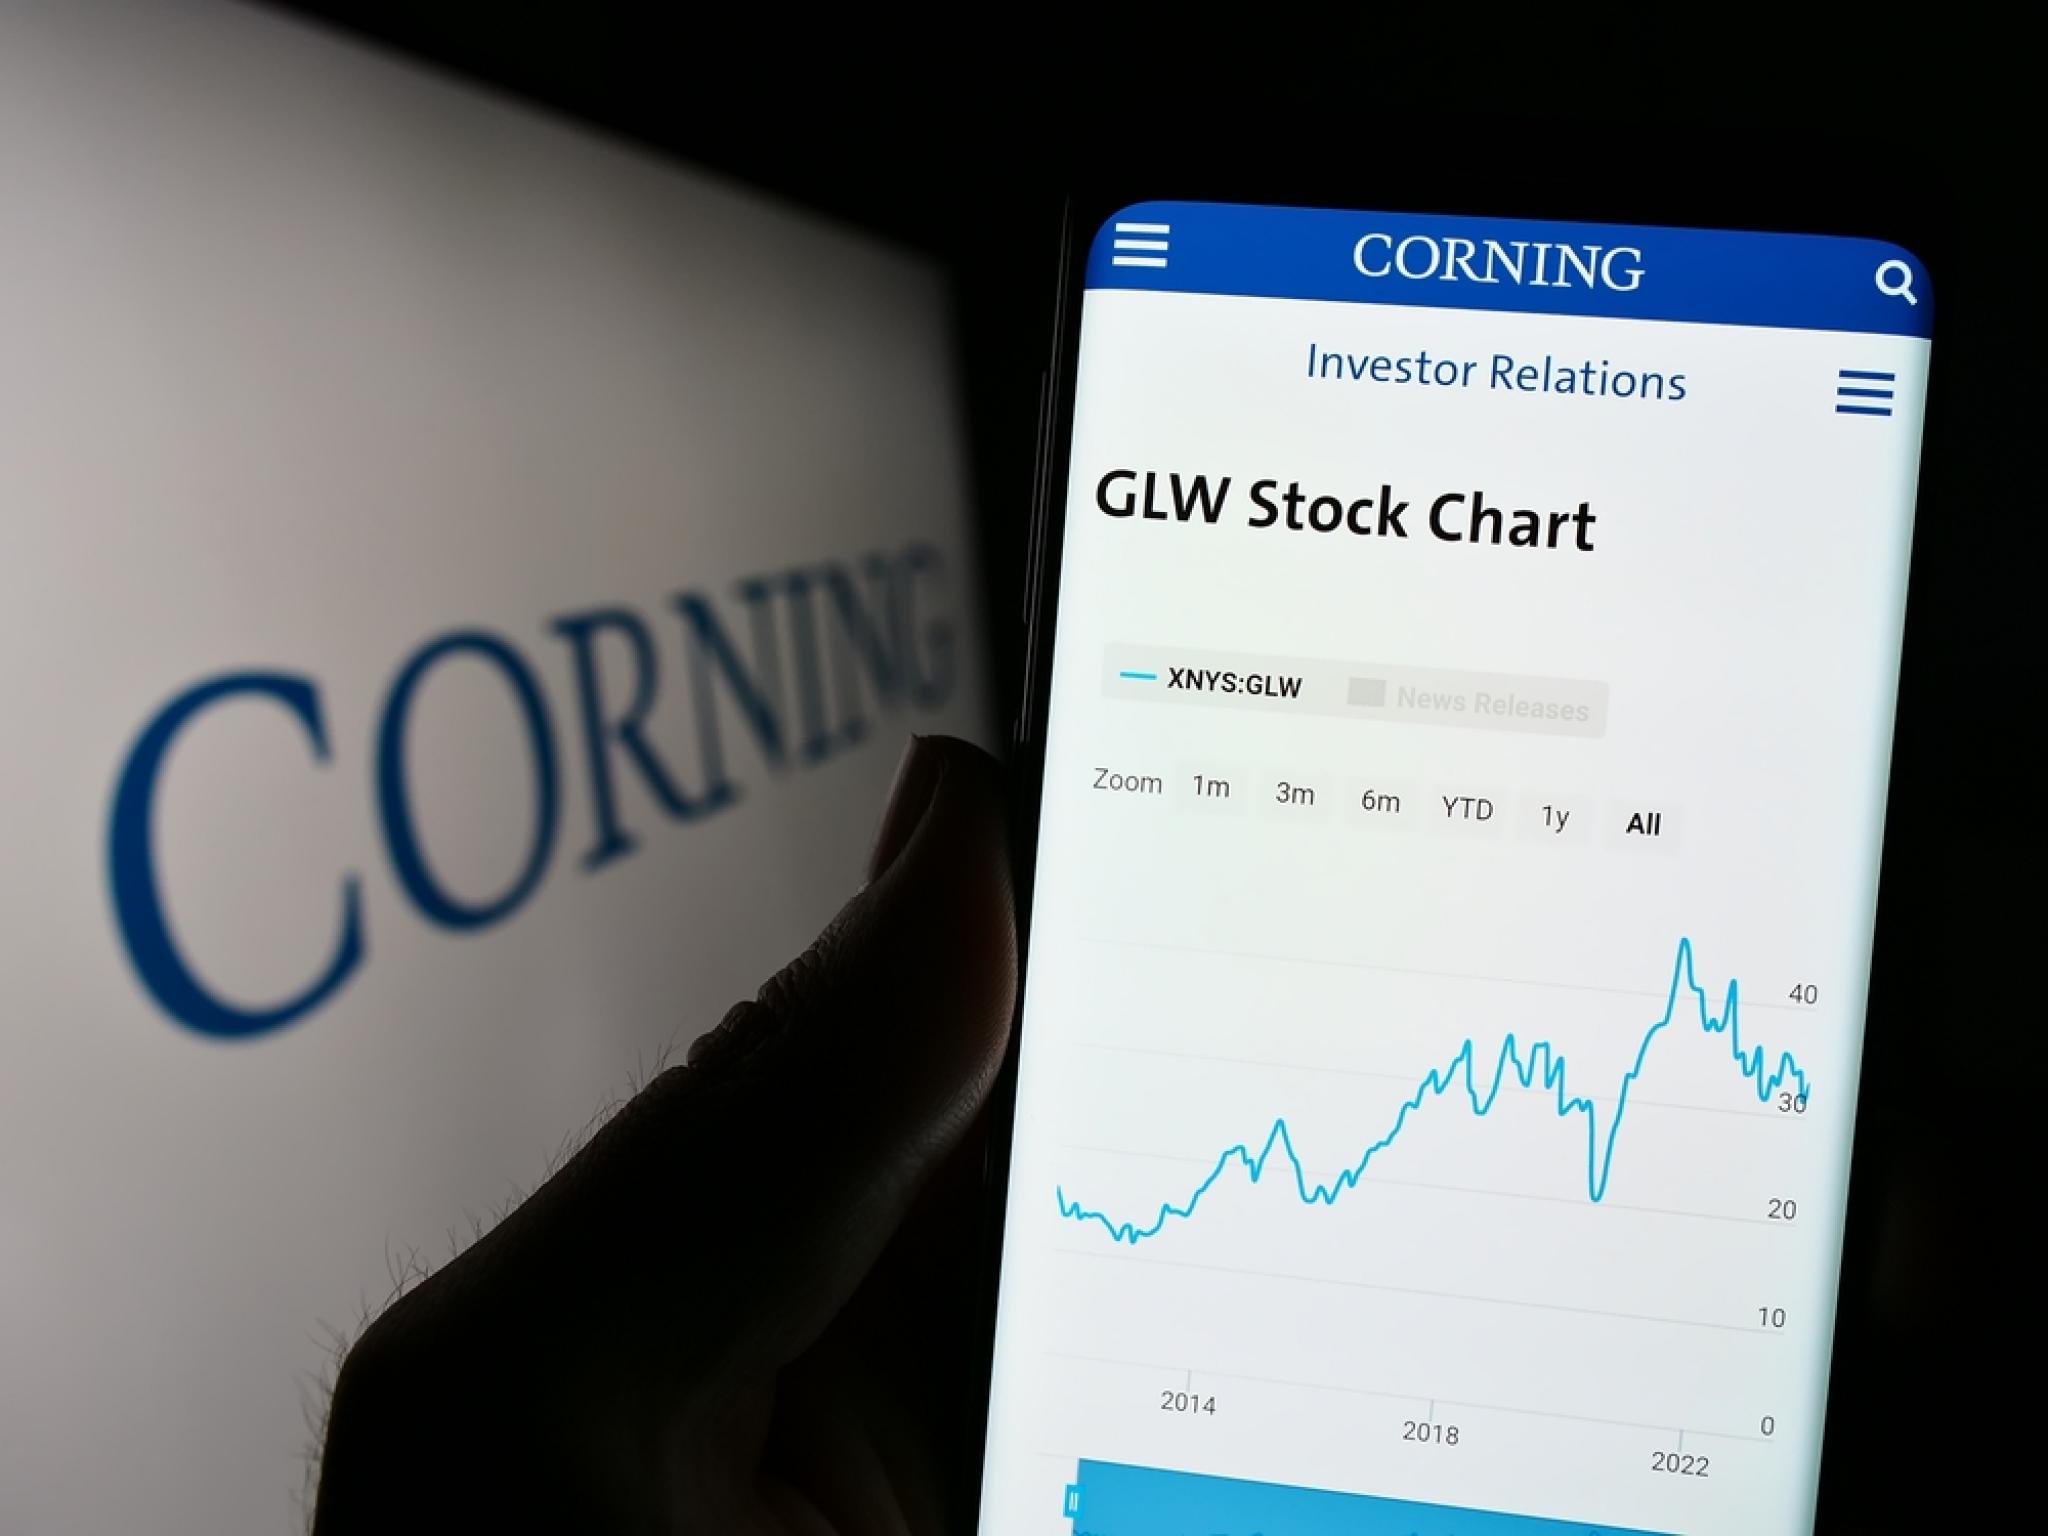  jim-cramer-offers-his-take-on-corning-calls-this-healthcare-stock-a-terrific-spec 